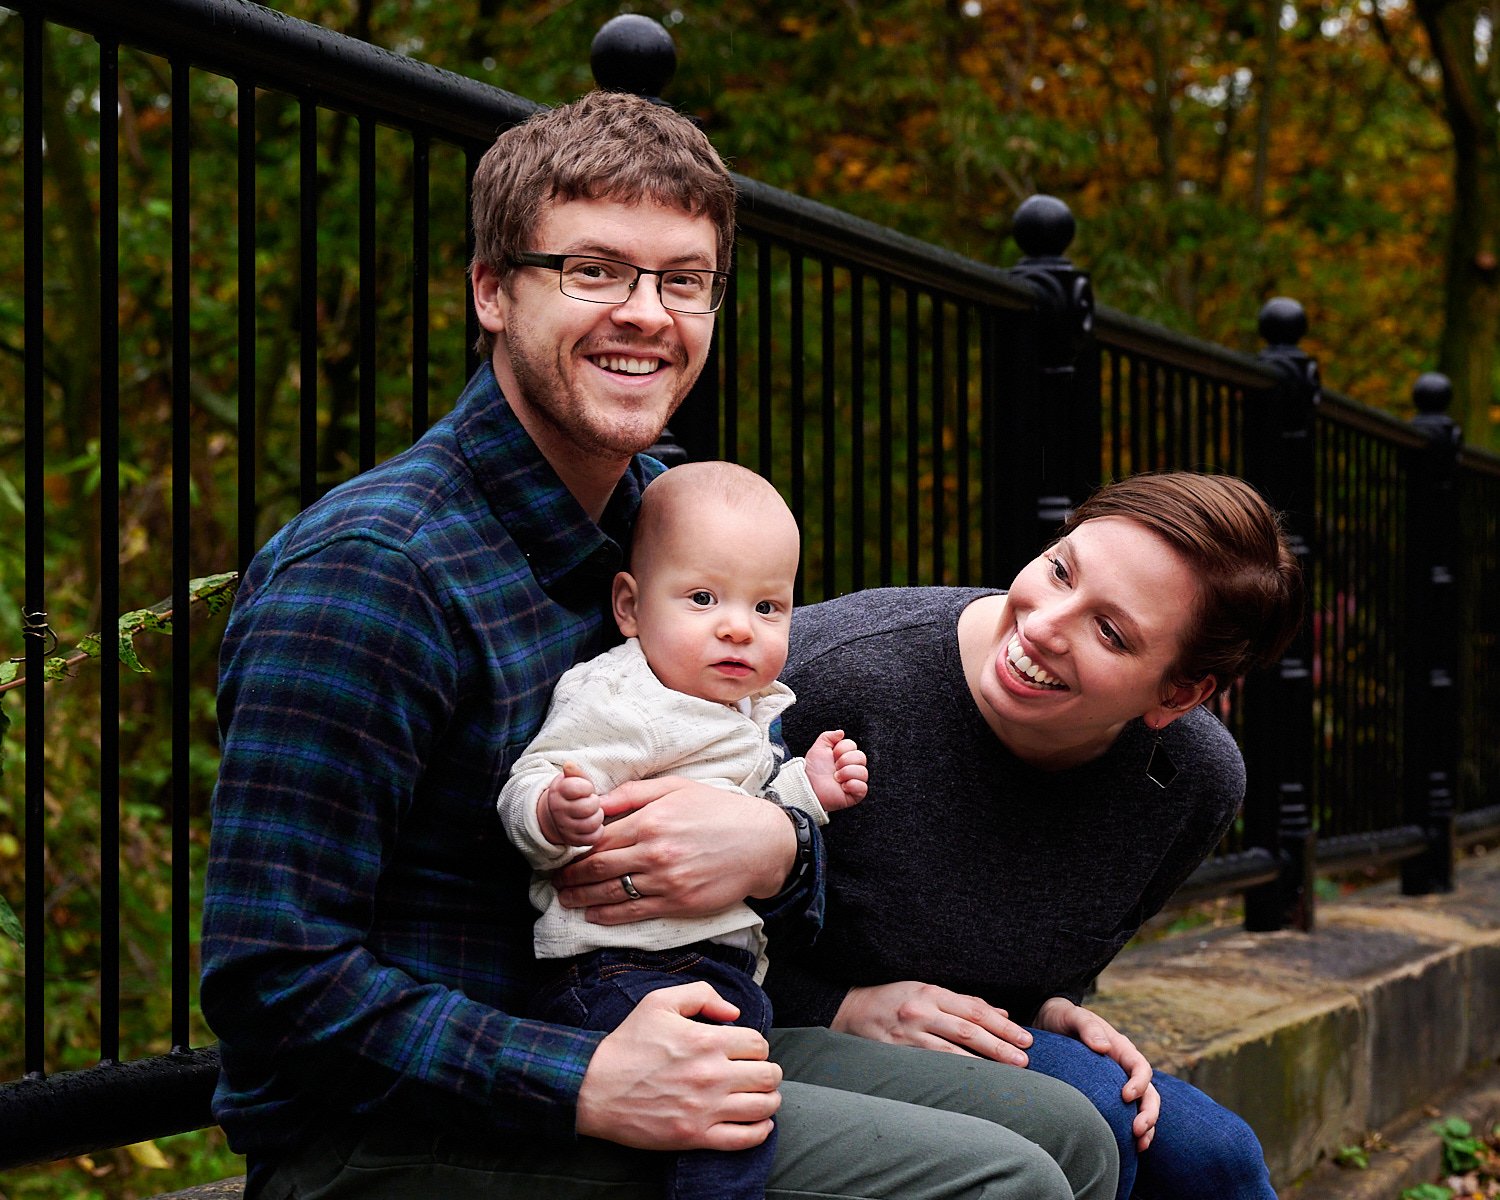  Leanne Elliott is posing with her bespectacled husband and a smiling 9 month old son in front of Phipps Conservatory and Botanical Gardens of Pittsburgh, PA. The family is dressed in a checked shirt. 